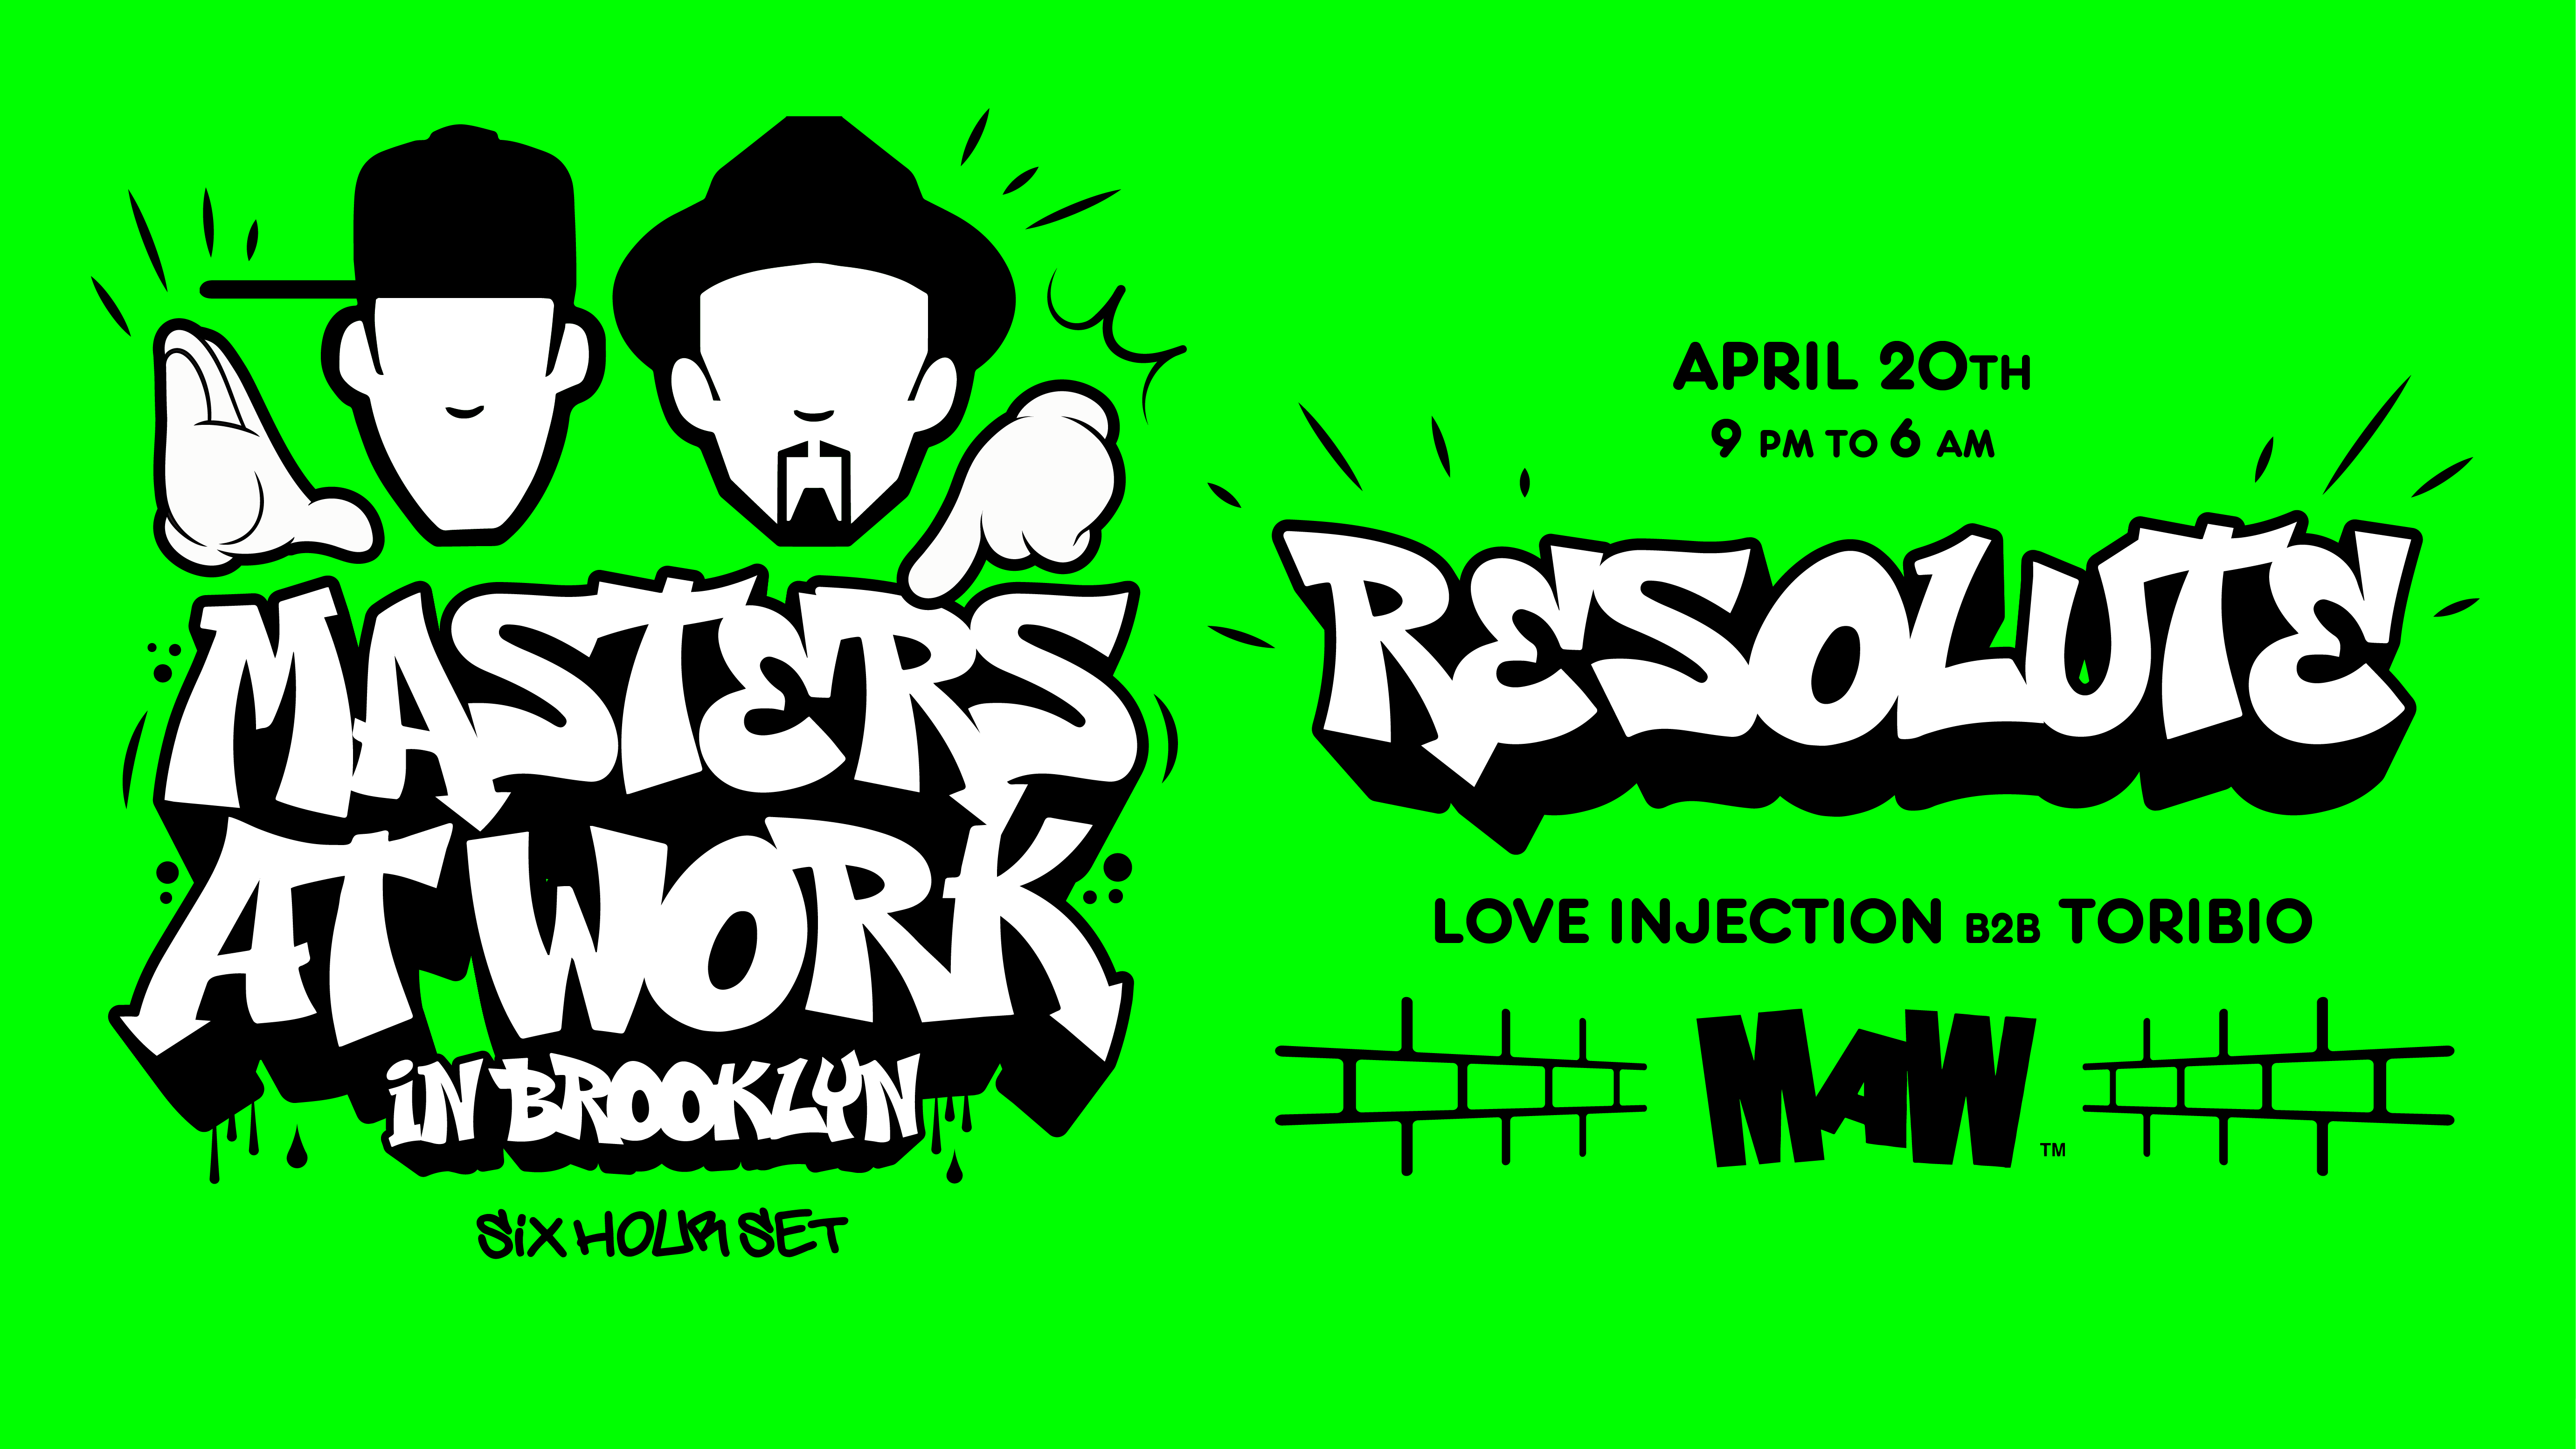 ReSolute presents: Masters At Work - フライヤー表